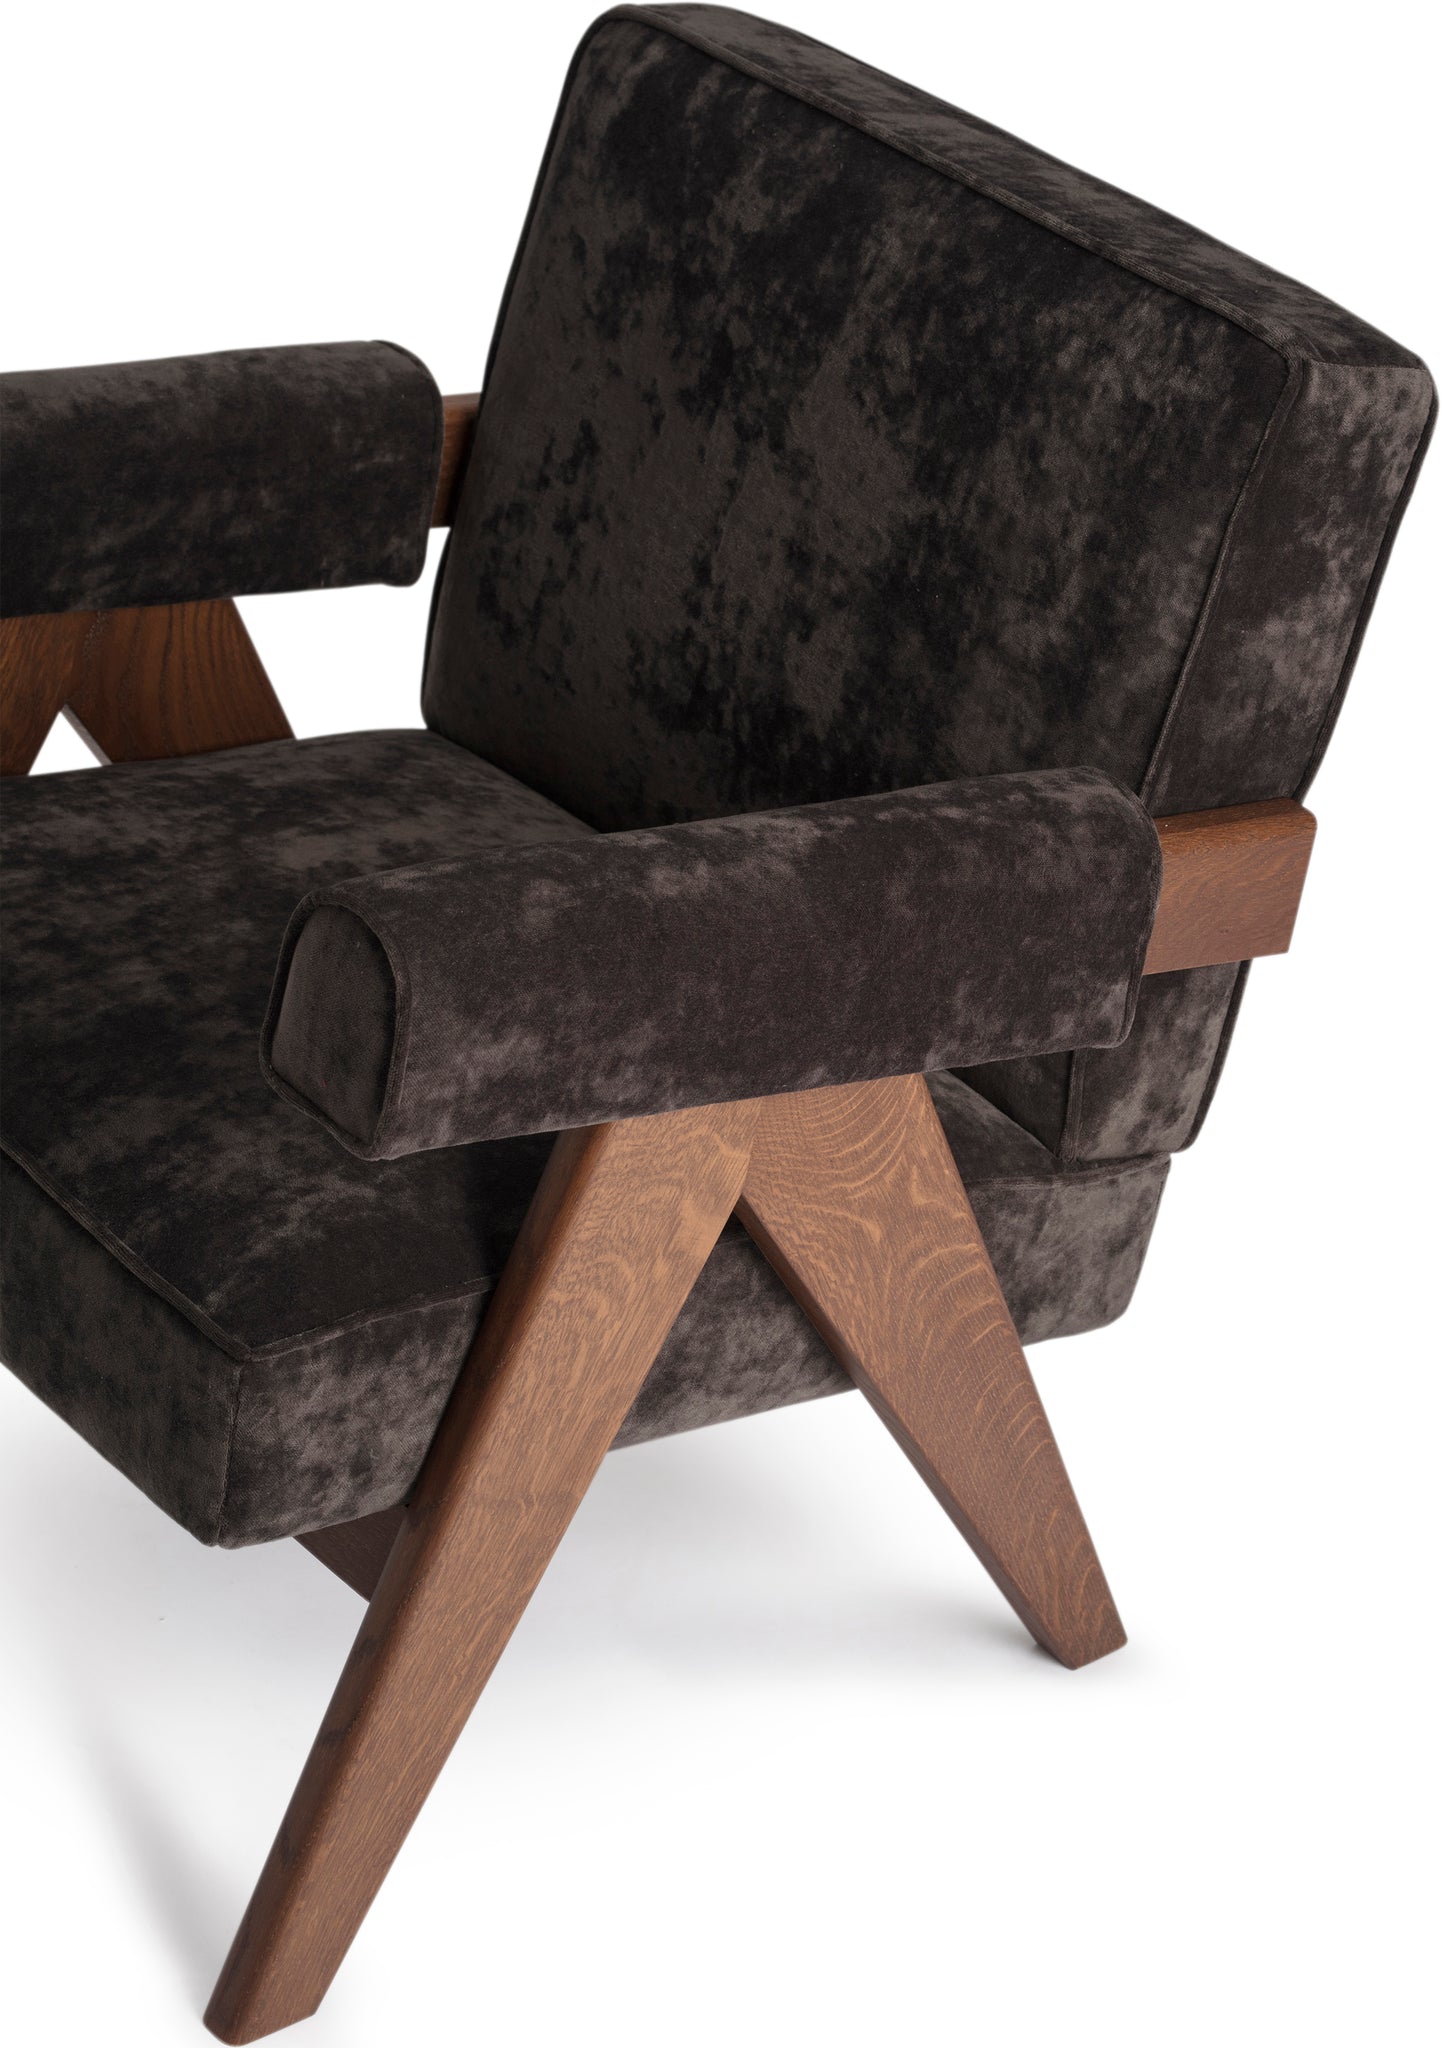 Close-up 1 of an authentic chandigarh lounge chair, pierre jeanneret era, walnut oak frame, chocolate brown mohair upholstery, by Klarel #K35-15